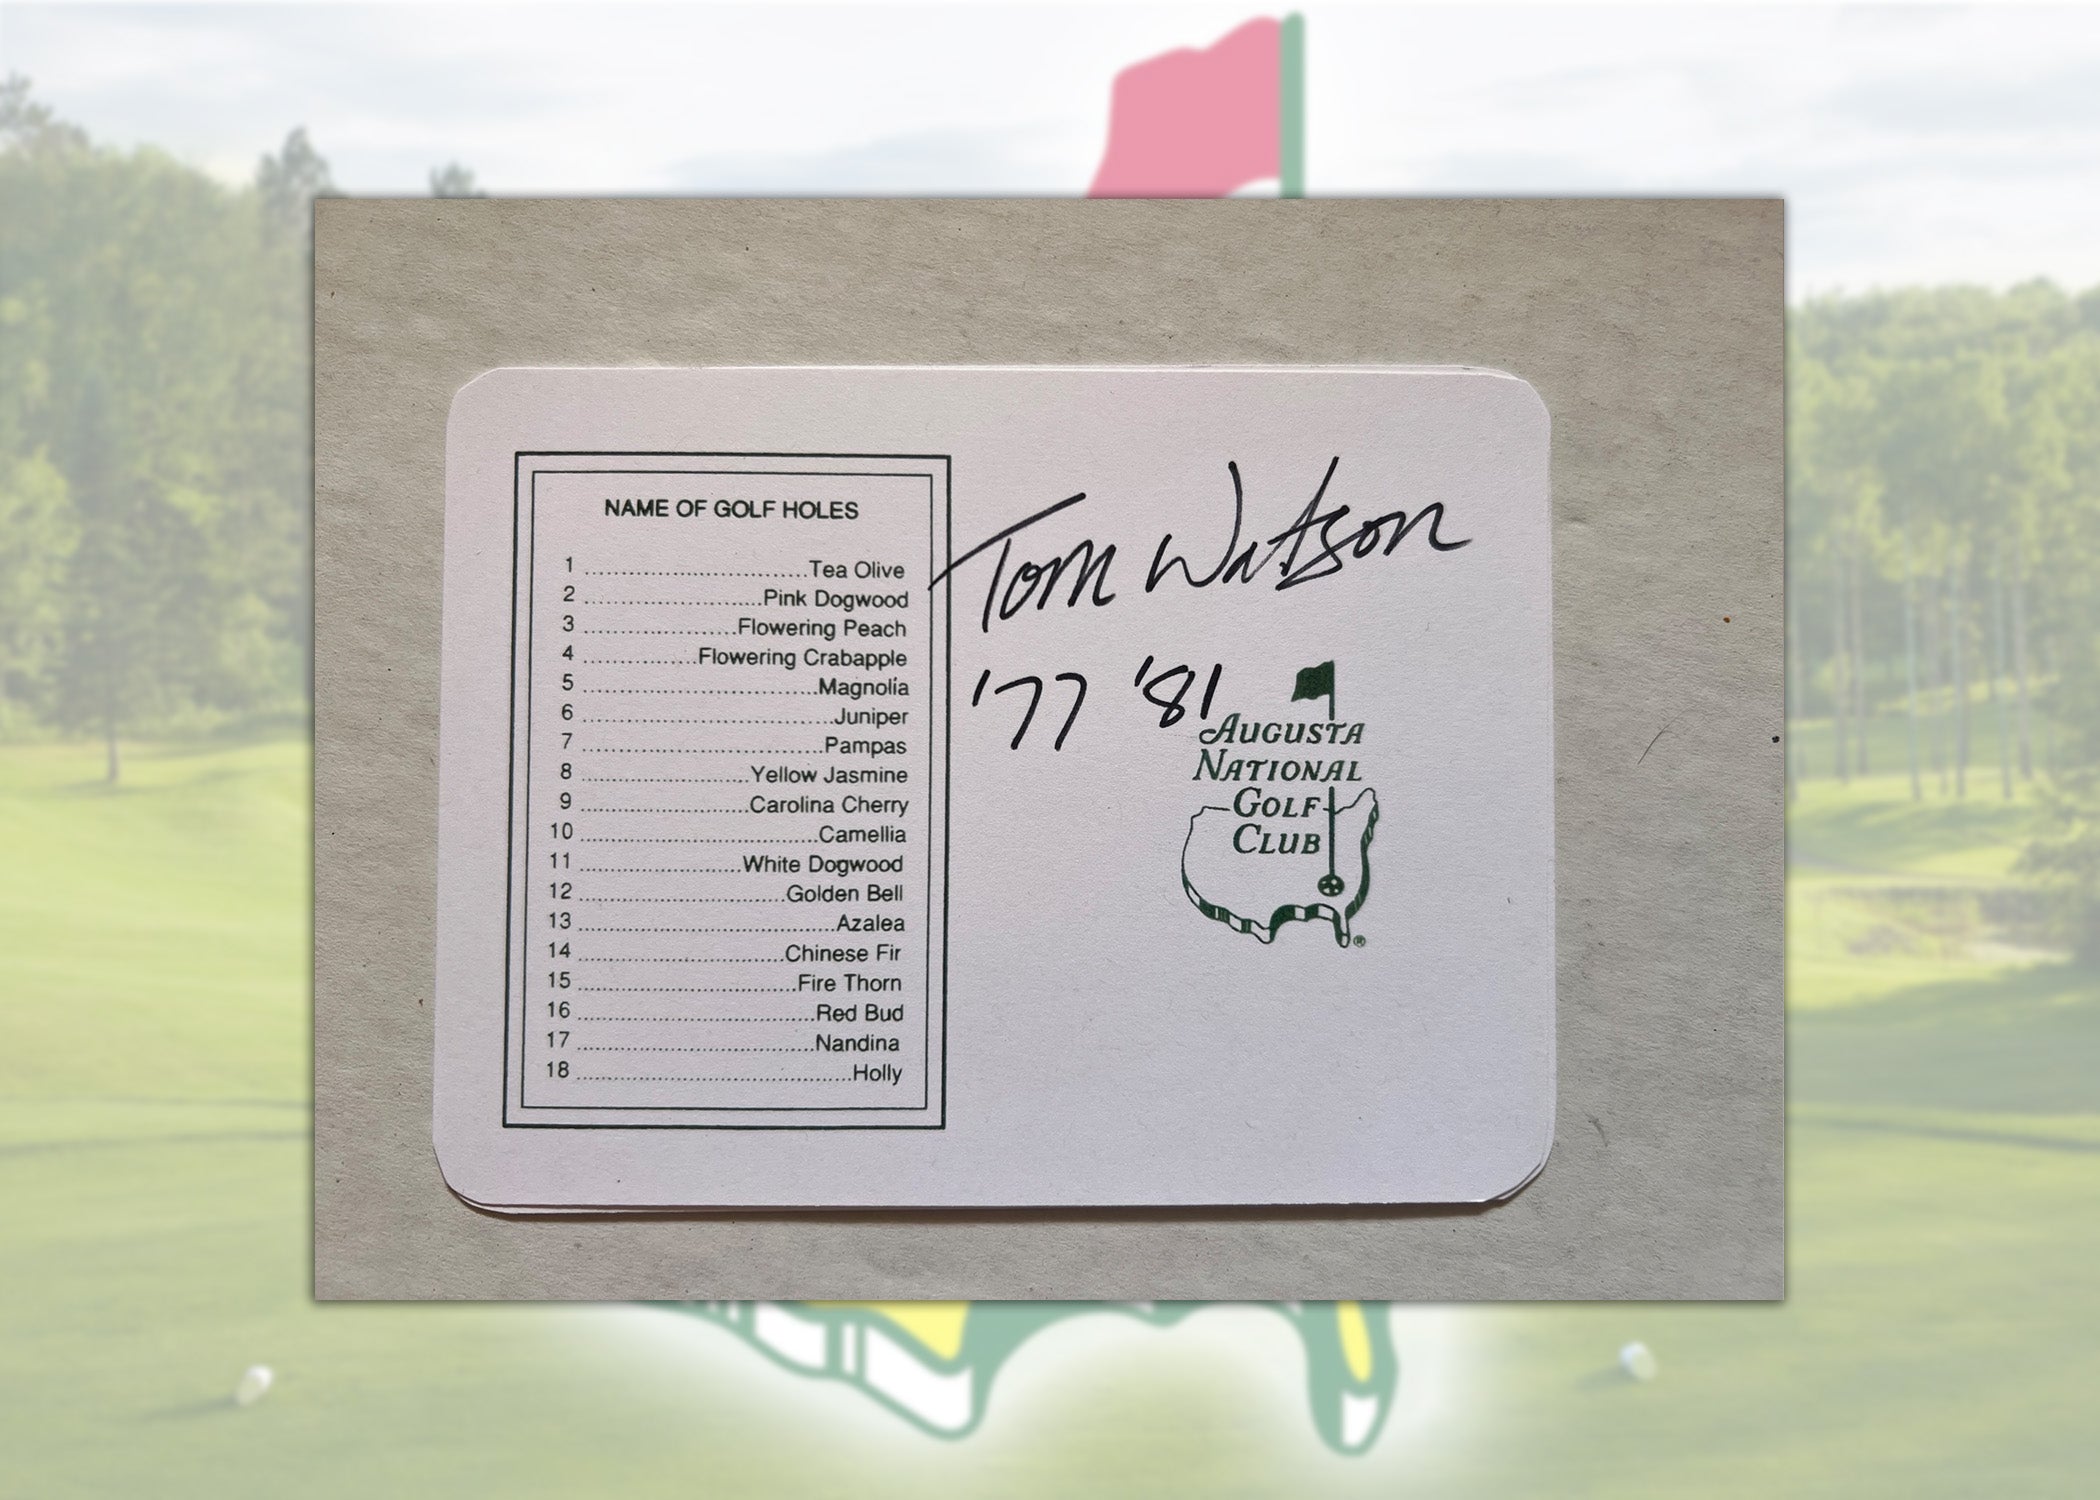 Tom Watson Masters Golf scorecard signed and inscribed " '77 '81" years that he won the Masters with proof